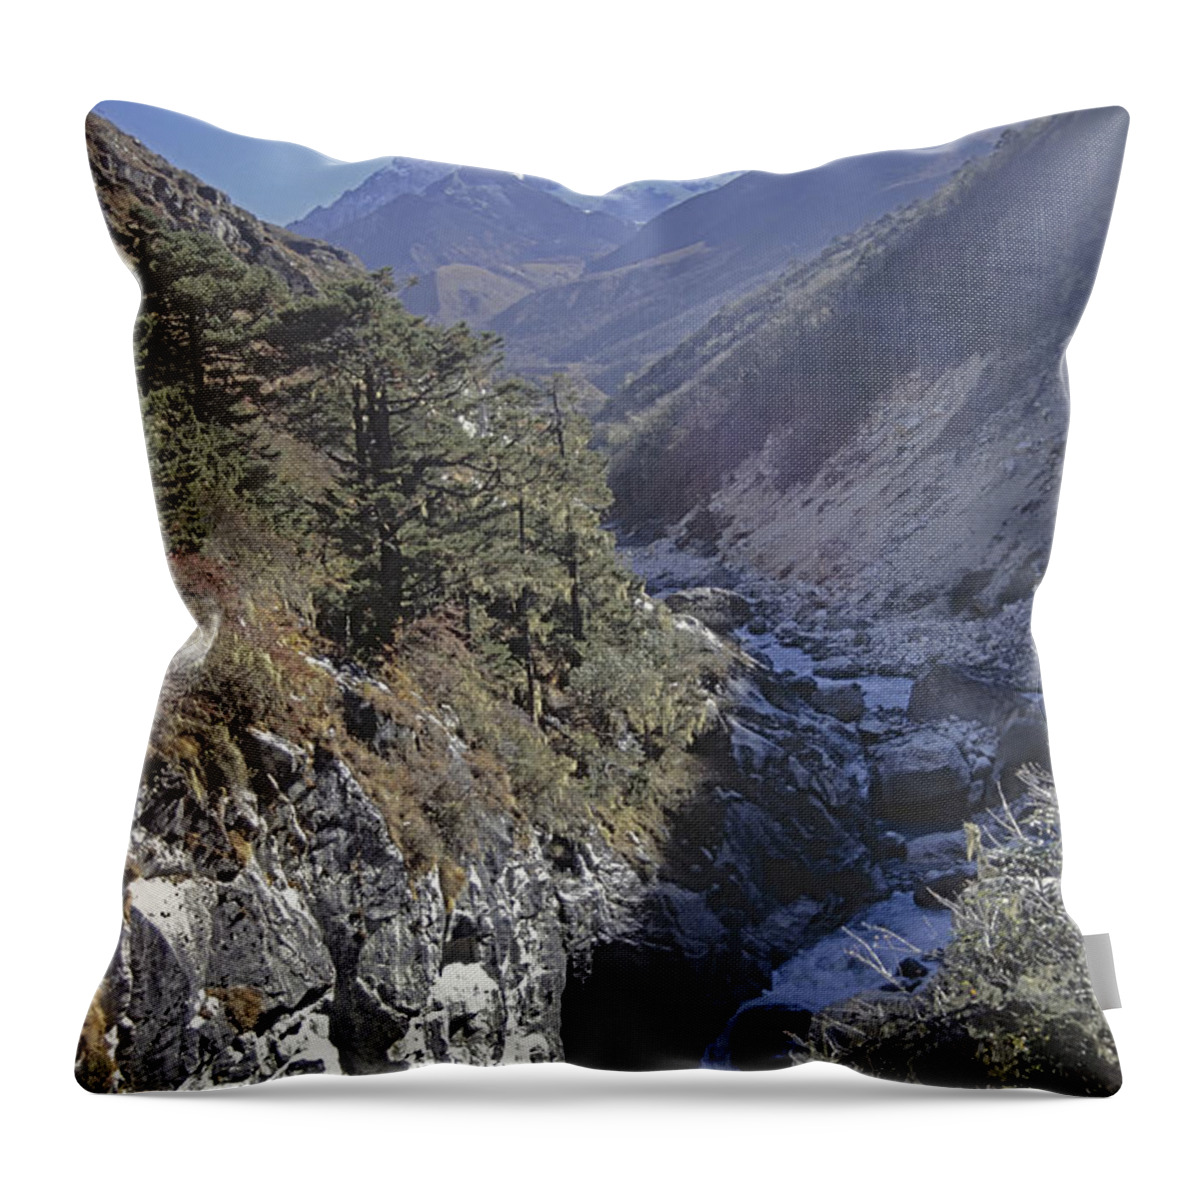 Prott Throw Pillow featuring the photograph Ama Dablam Nepal by Rudi Prott